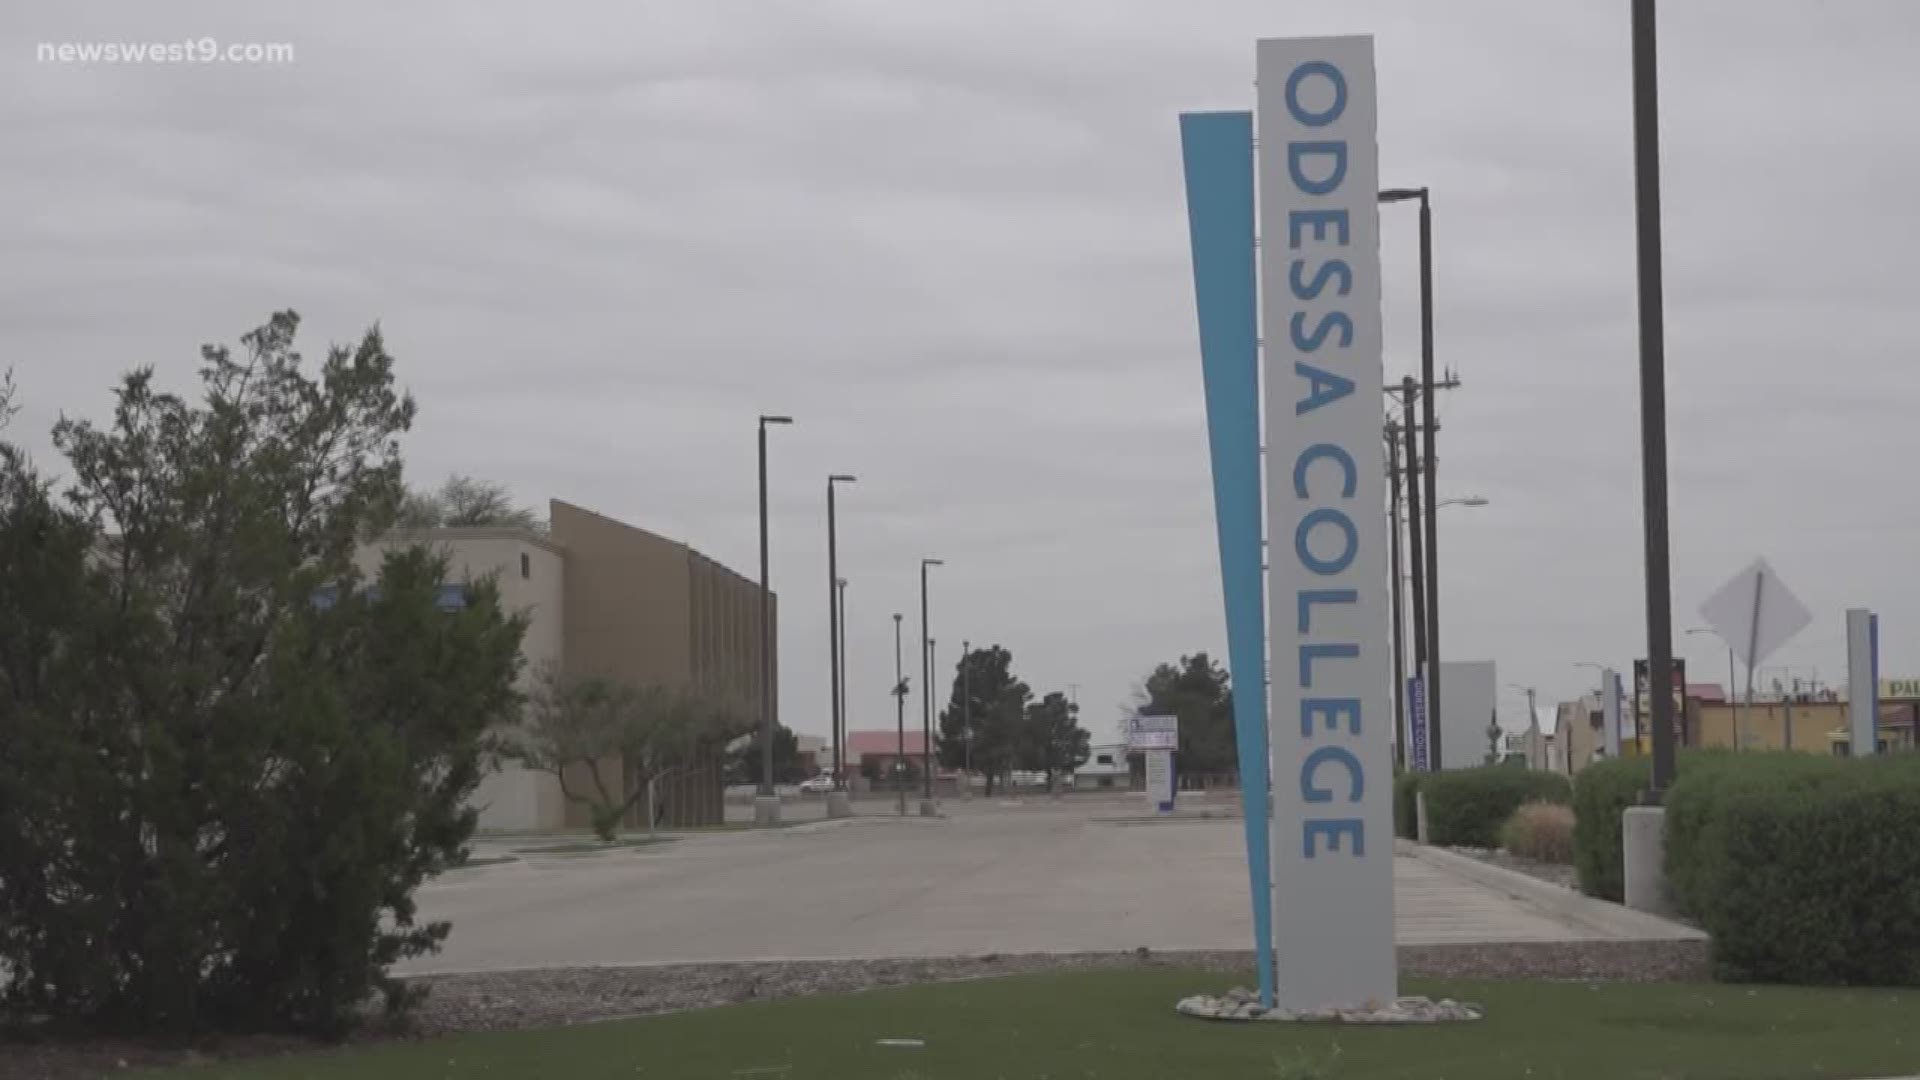 Like many schools, Odessa College has had to move to entirely online classes, but that doesn't seem to be stopping them.